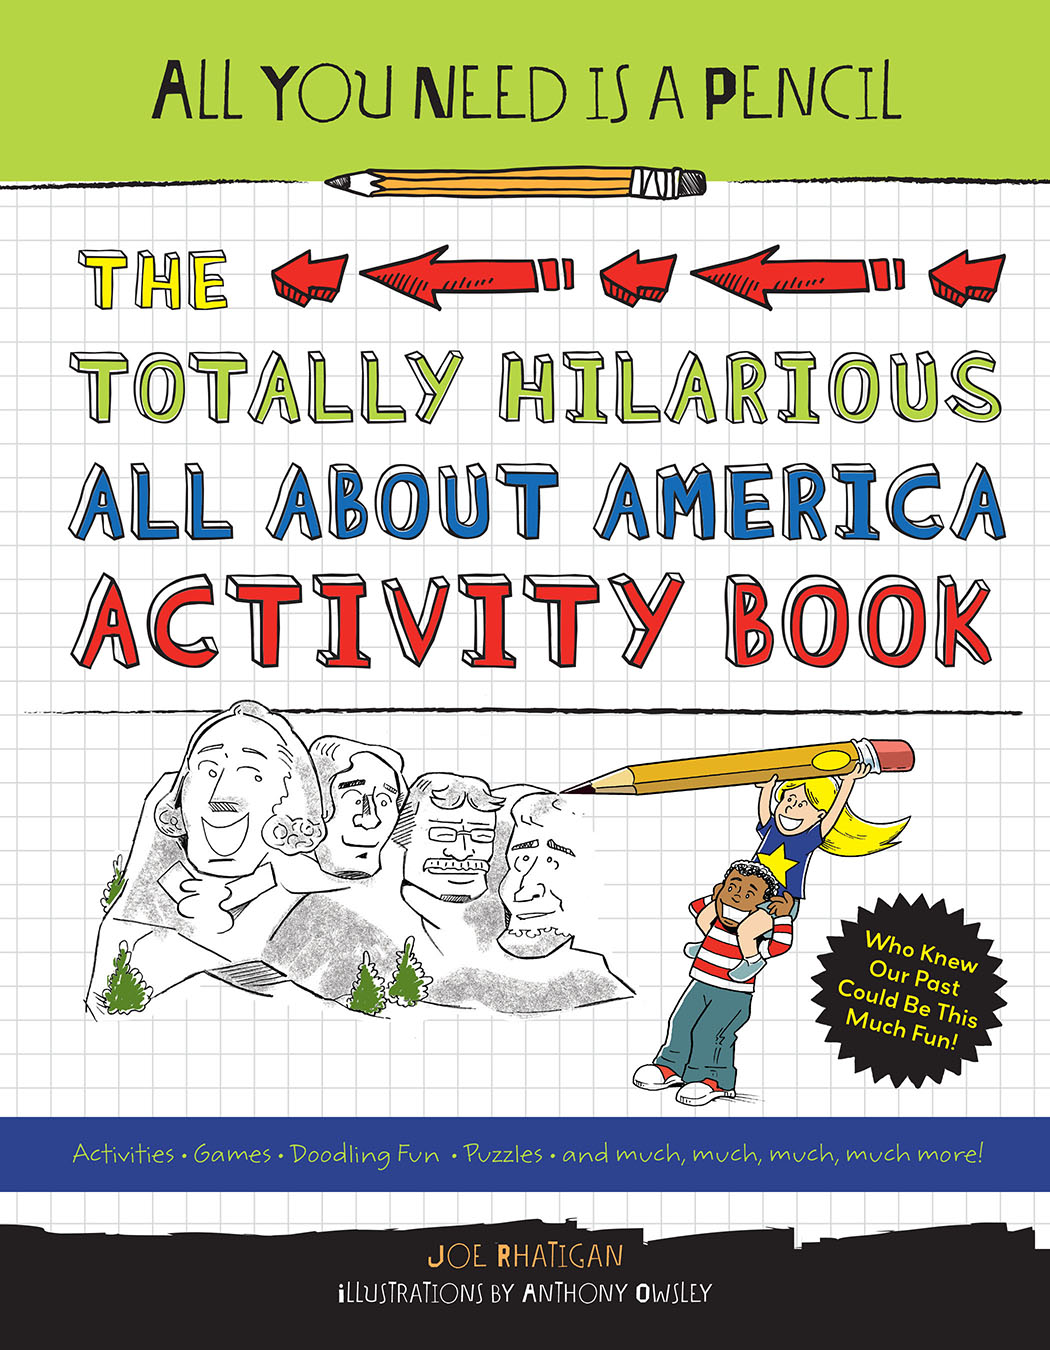 All You Need is a Pencil: The Totally Hilarious All About America Activity Book